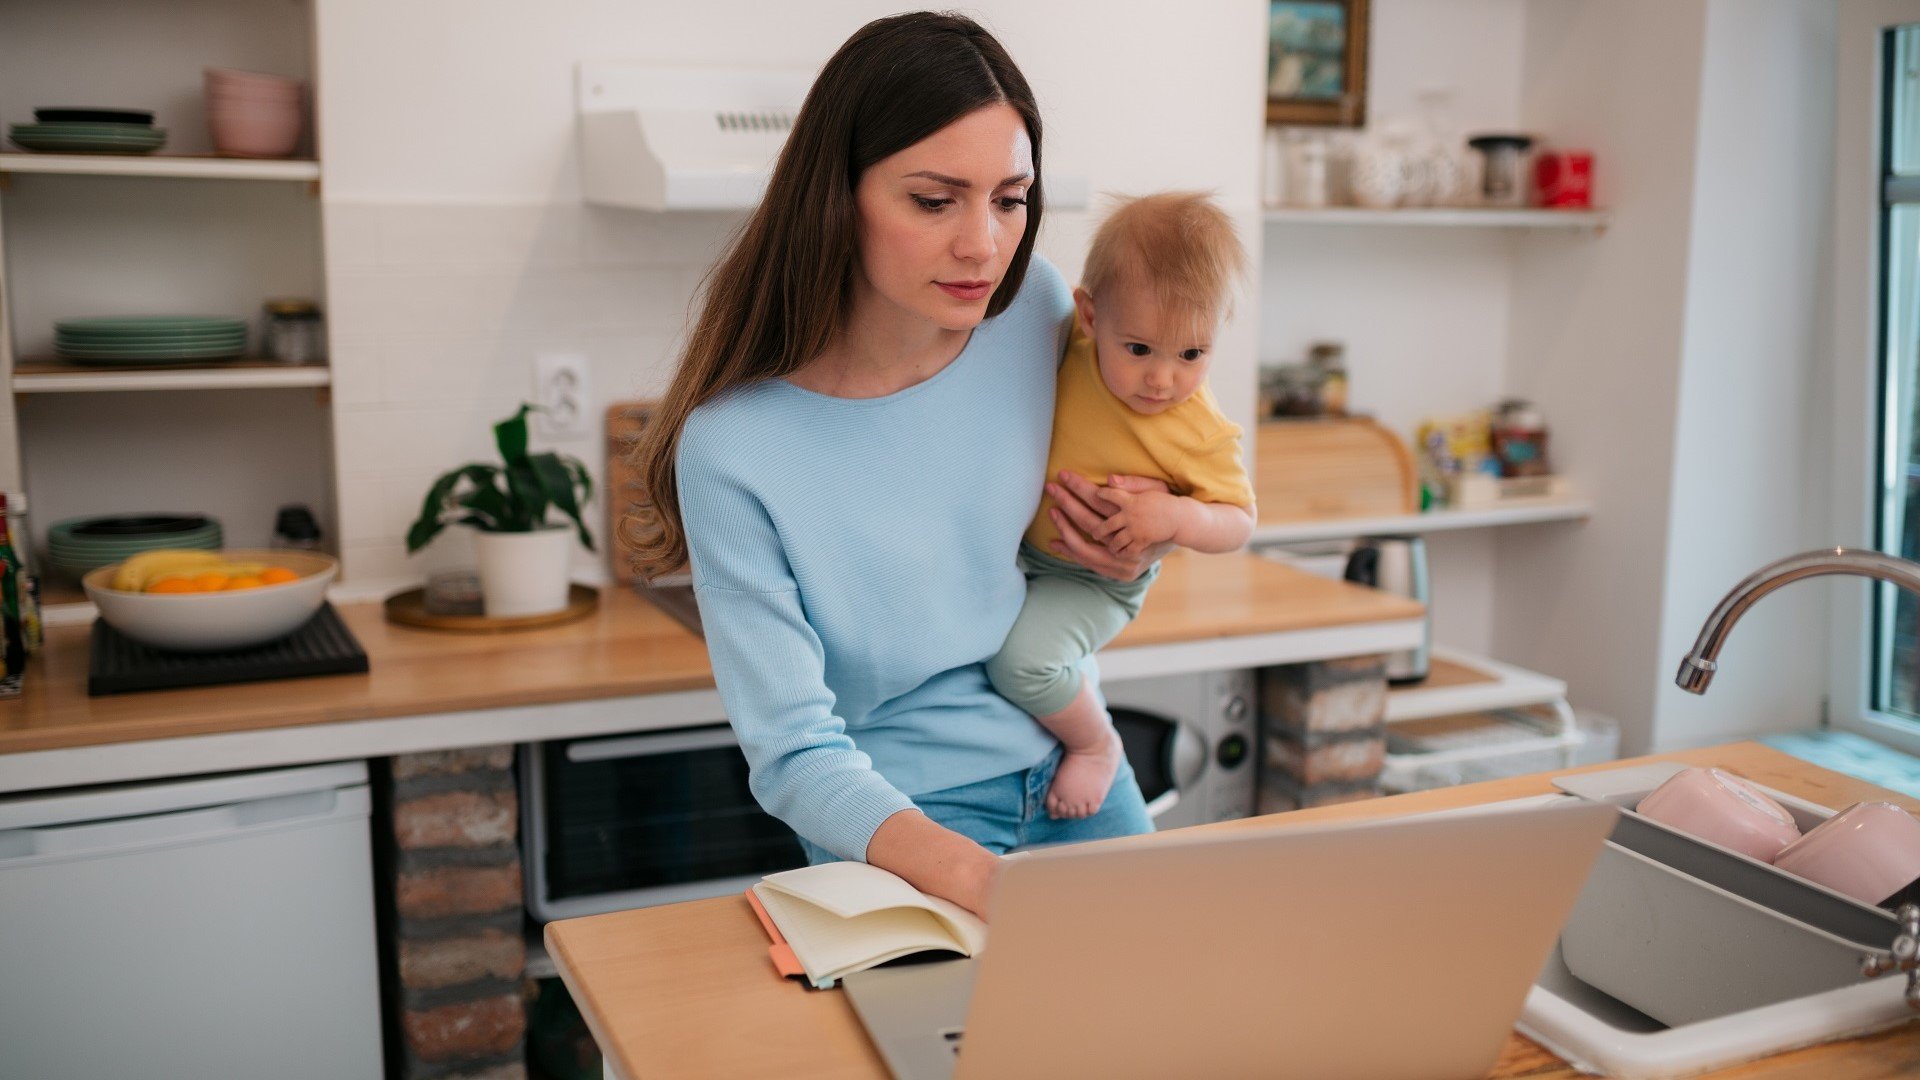 7 Lucrative Side Hustles for Stay-at-Home Moms